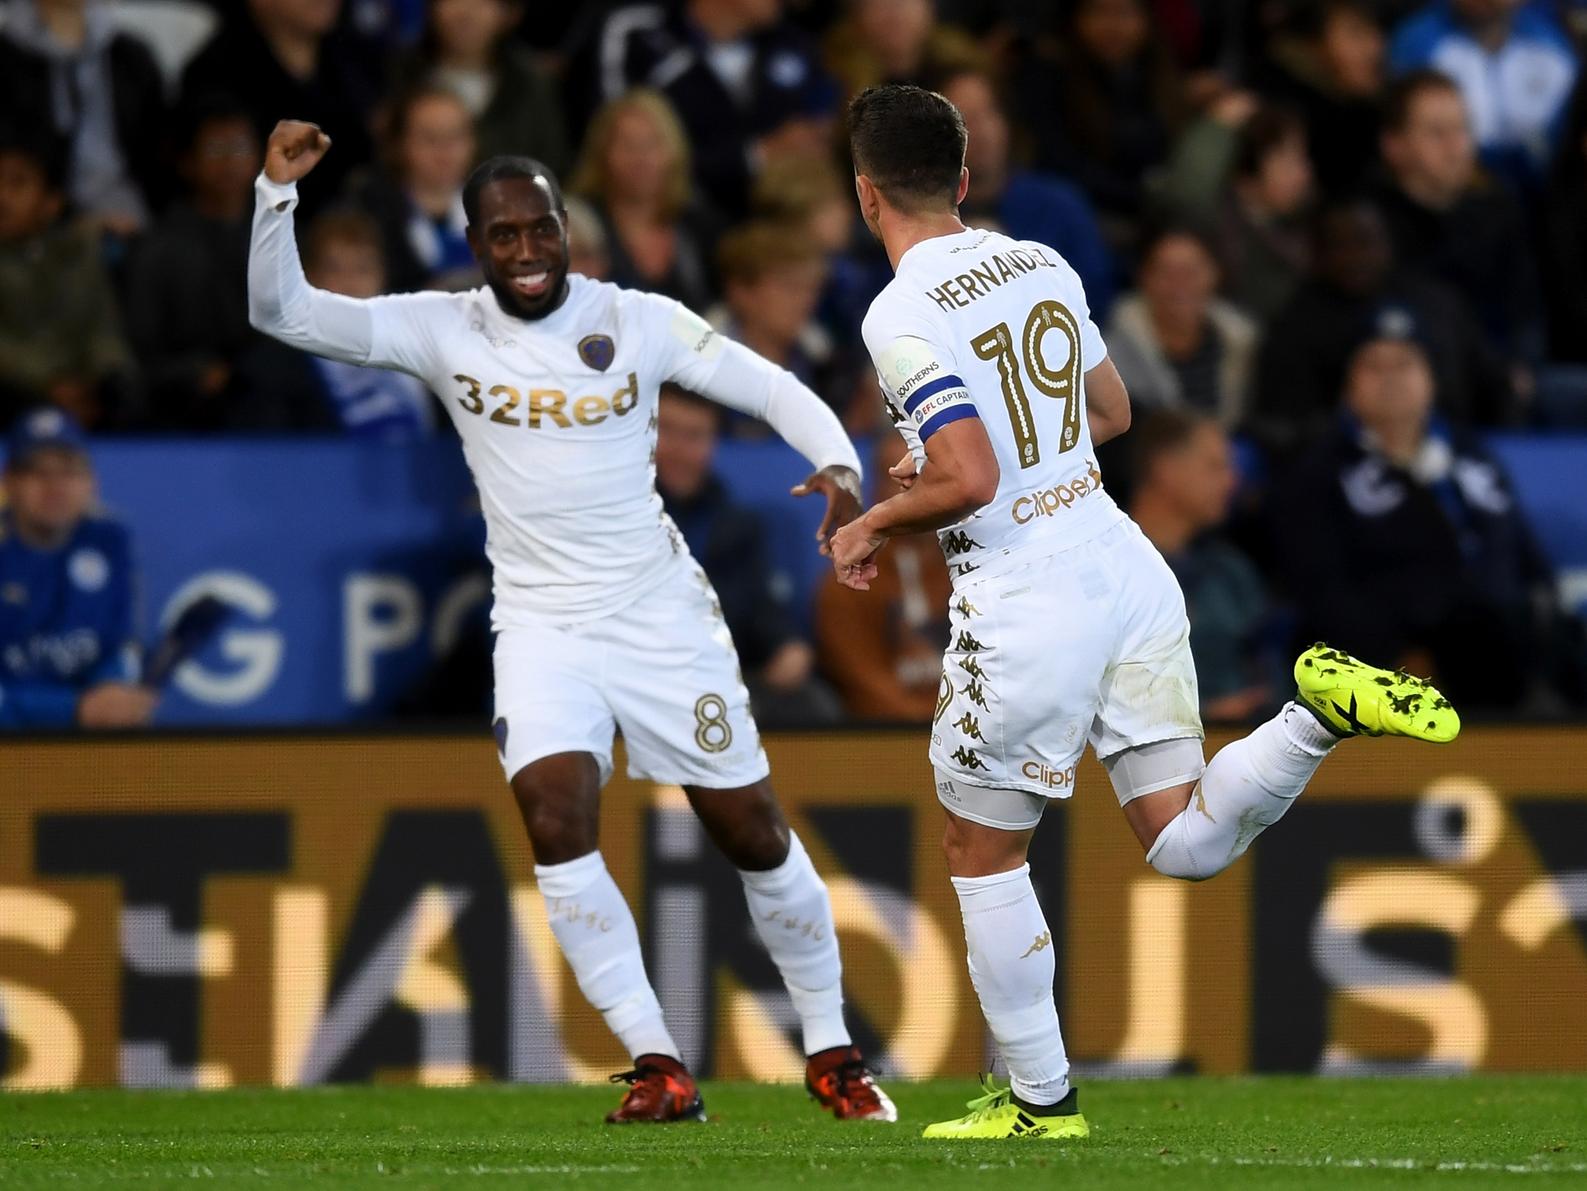 Vurnon Anita, who was released by Leeds United over the summer, has emerged as a potential target for Roma, who are looking to bolster their injury-ravaged midfield. (Sport Witness)